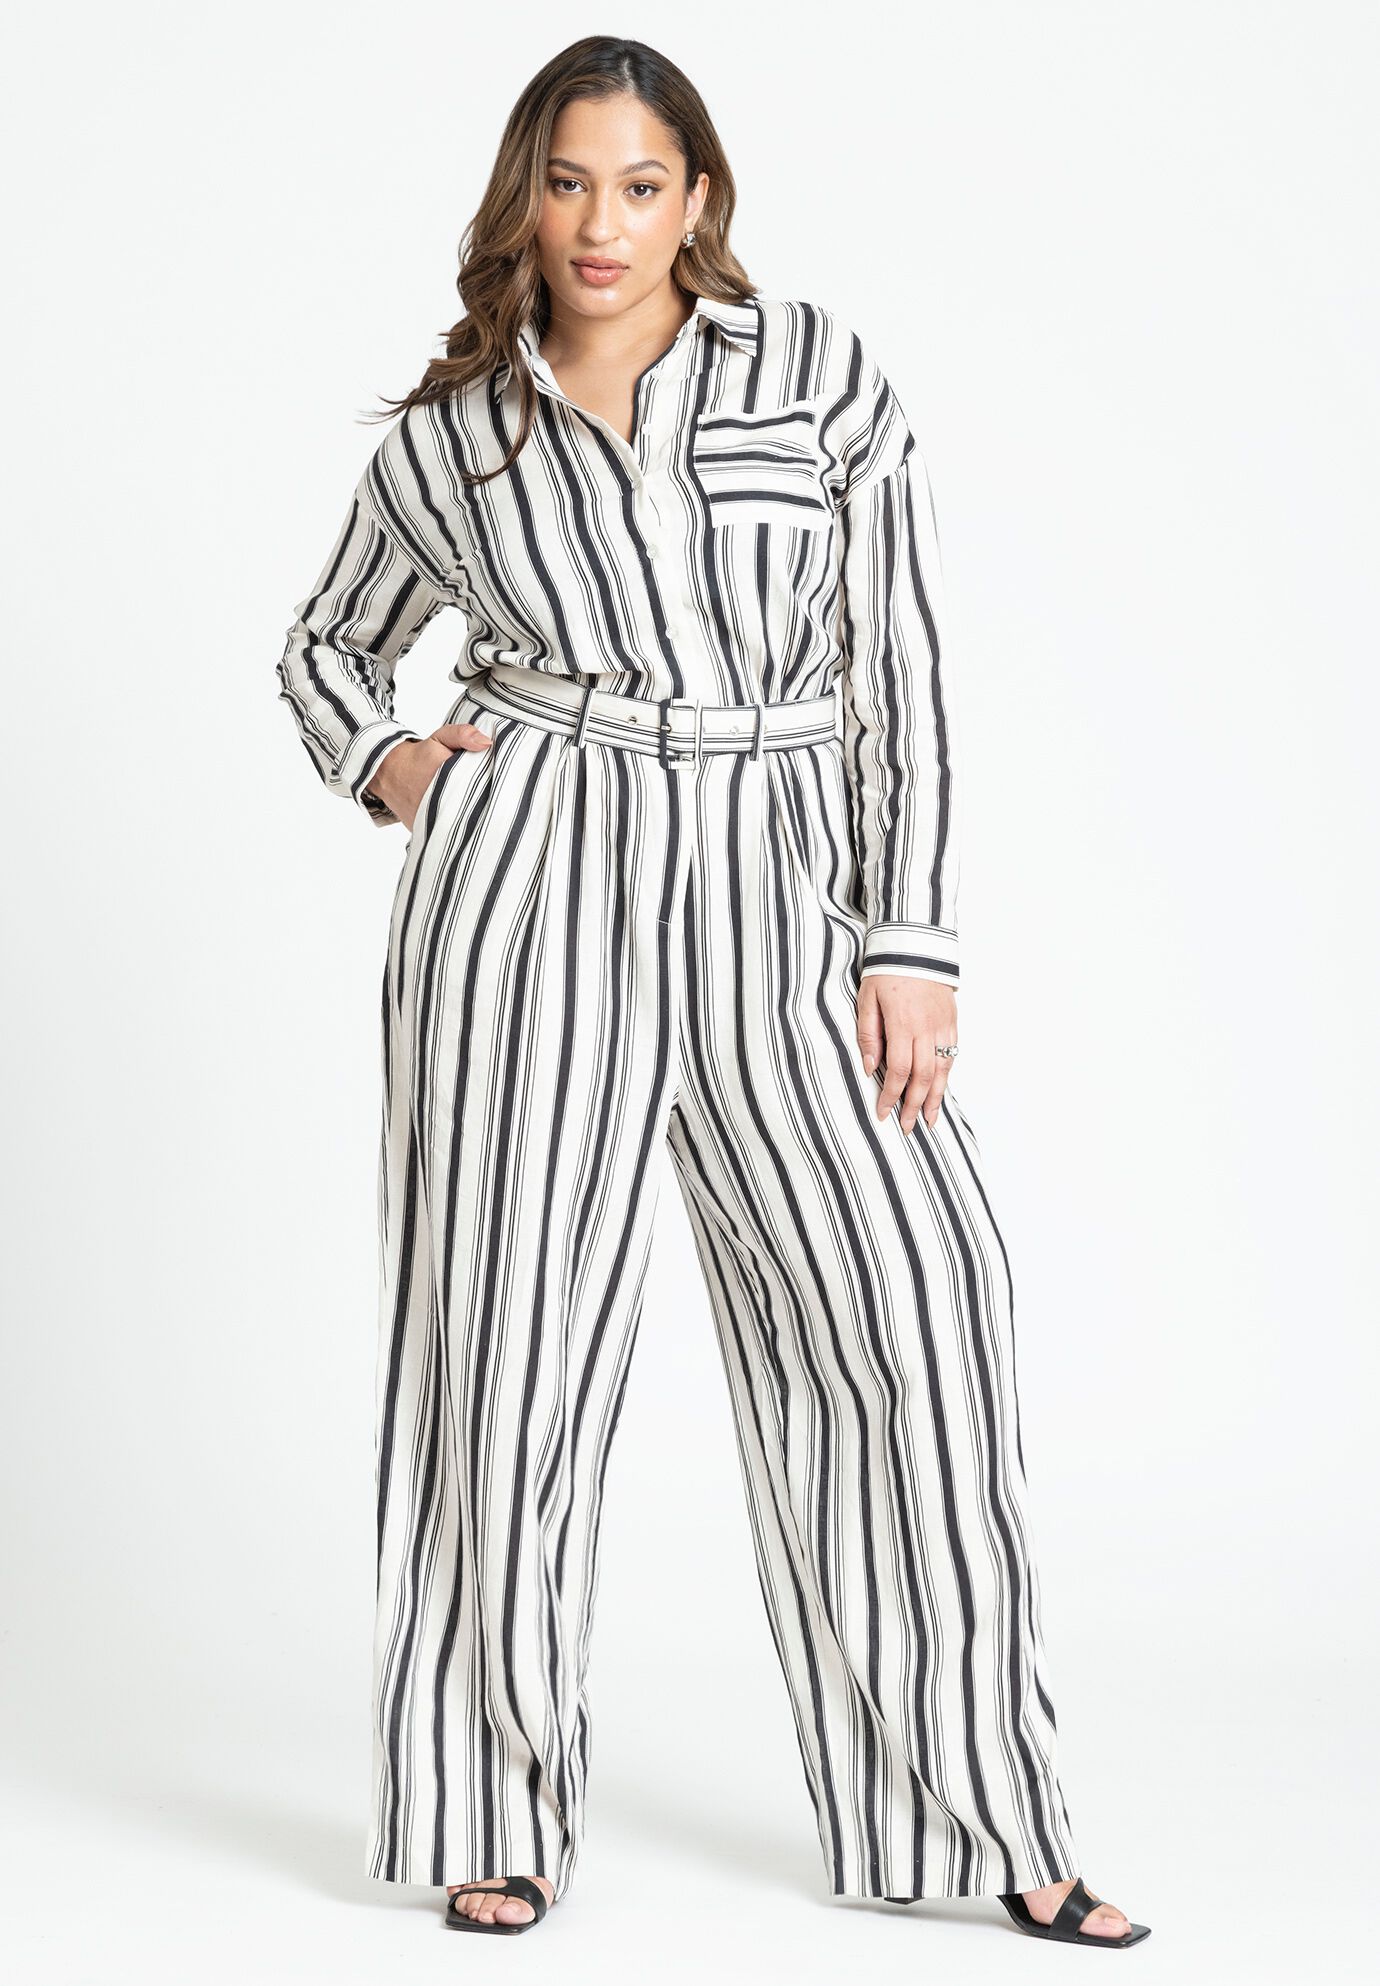 Plus Size Long Sleeves Dropped Shoulder Striped Print Floor Length Pocketed Pleated Belted Collared Jumpsuit